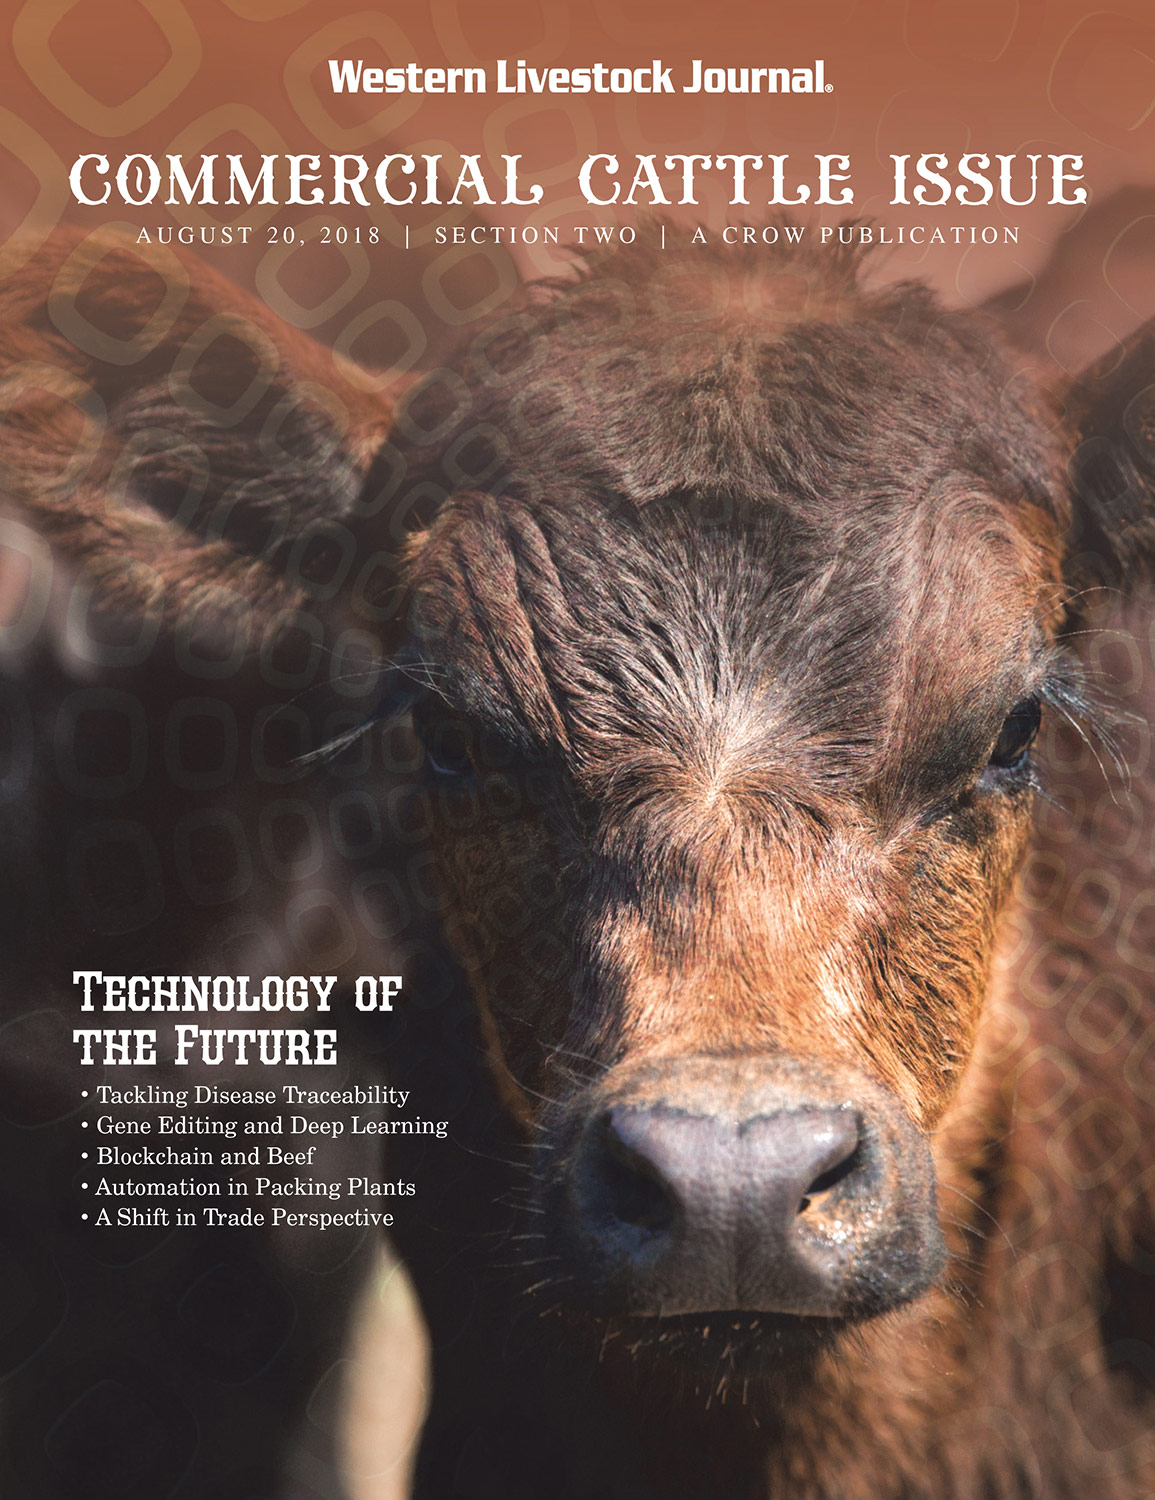 Published Cattle Stock Images on Cover of Western Livestock Journal